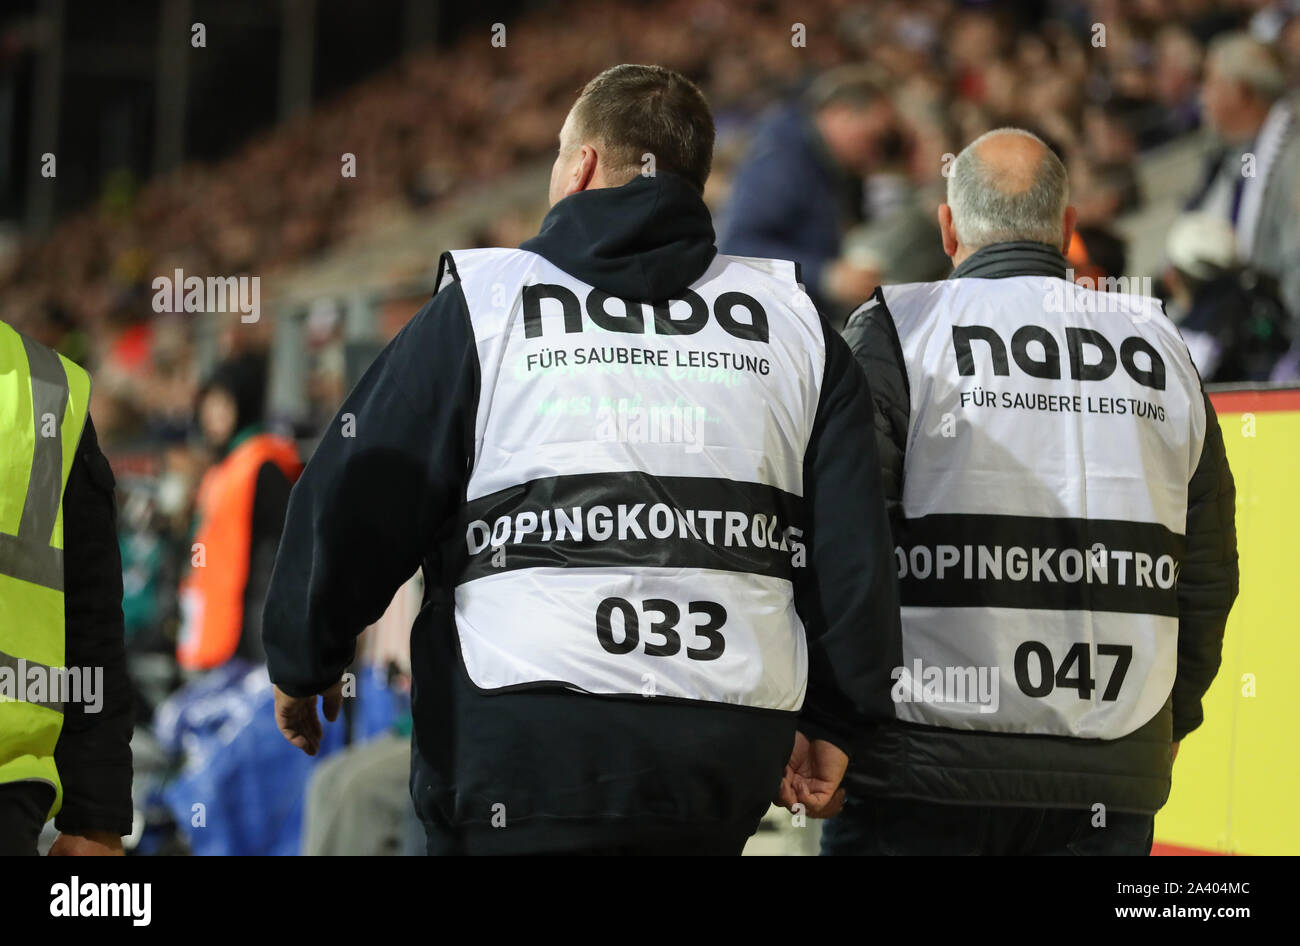 07 October 2019, Lower Saxony, Osnabrück: Soccer: 2nd Bundesliga, VfL Osnabrück - Arminia Bielefeld, 9th matchday in the stadium at the Bremer Brücke. 'Doping Control' is on the bodice of two officials. Photo: Friso Gentsch/dpa - IMPORTANT NOTE: In accordance with the requirements of the DFL Deutsche Fußball Liga or the DFB Deutscher Fußball-Bund, it is prohibited to use or have used photographs taken in the stadium and/or the match in the form of sequence images and/or video-like photo sequences. Stock Photo